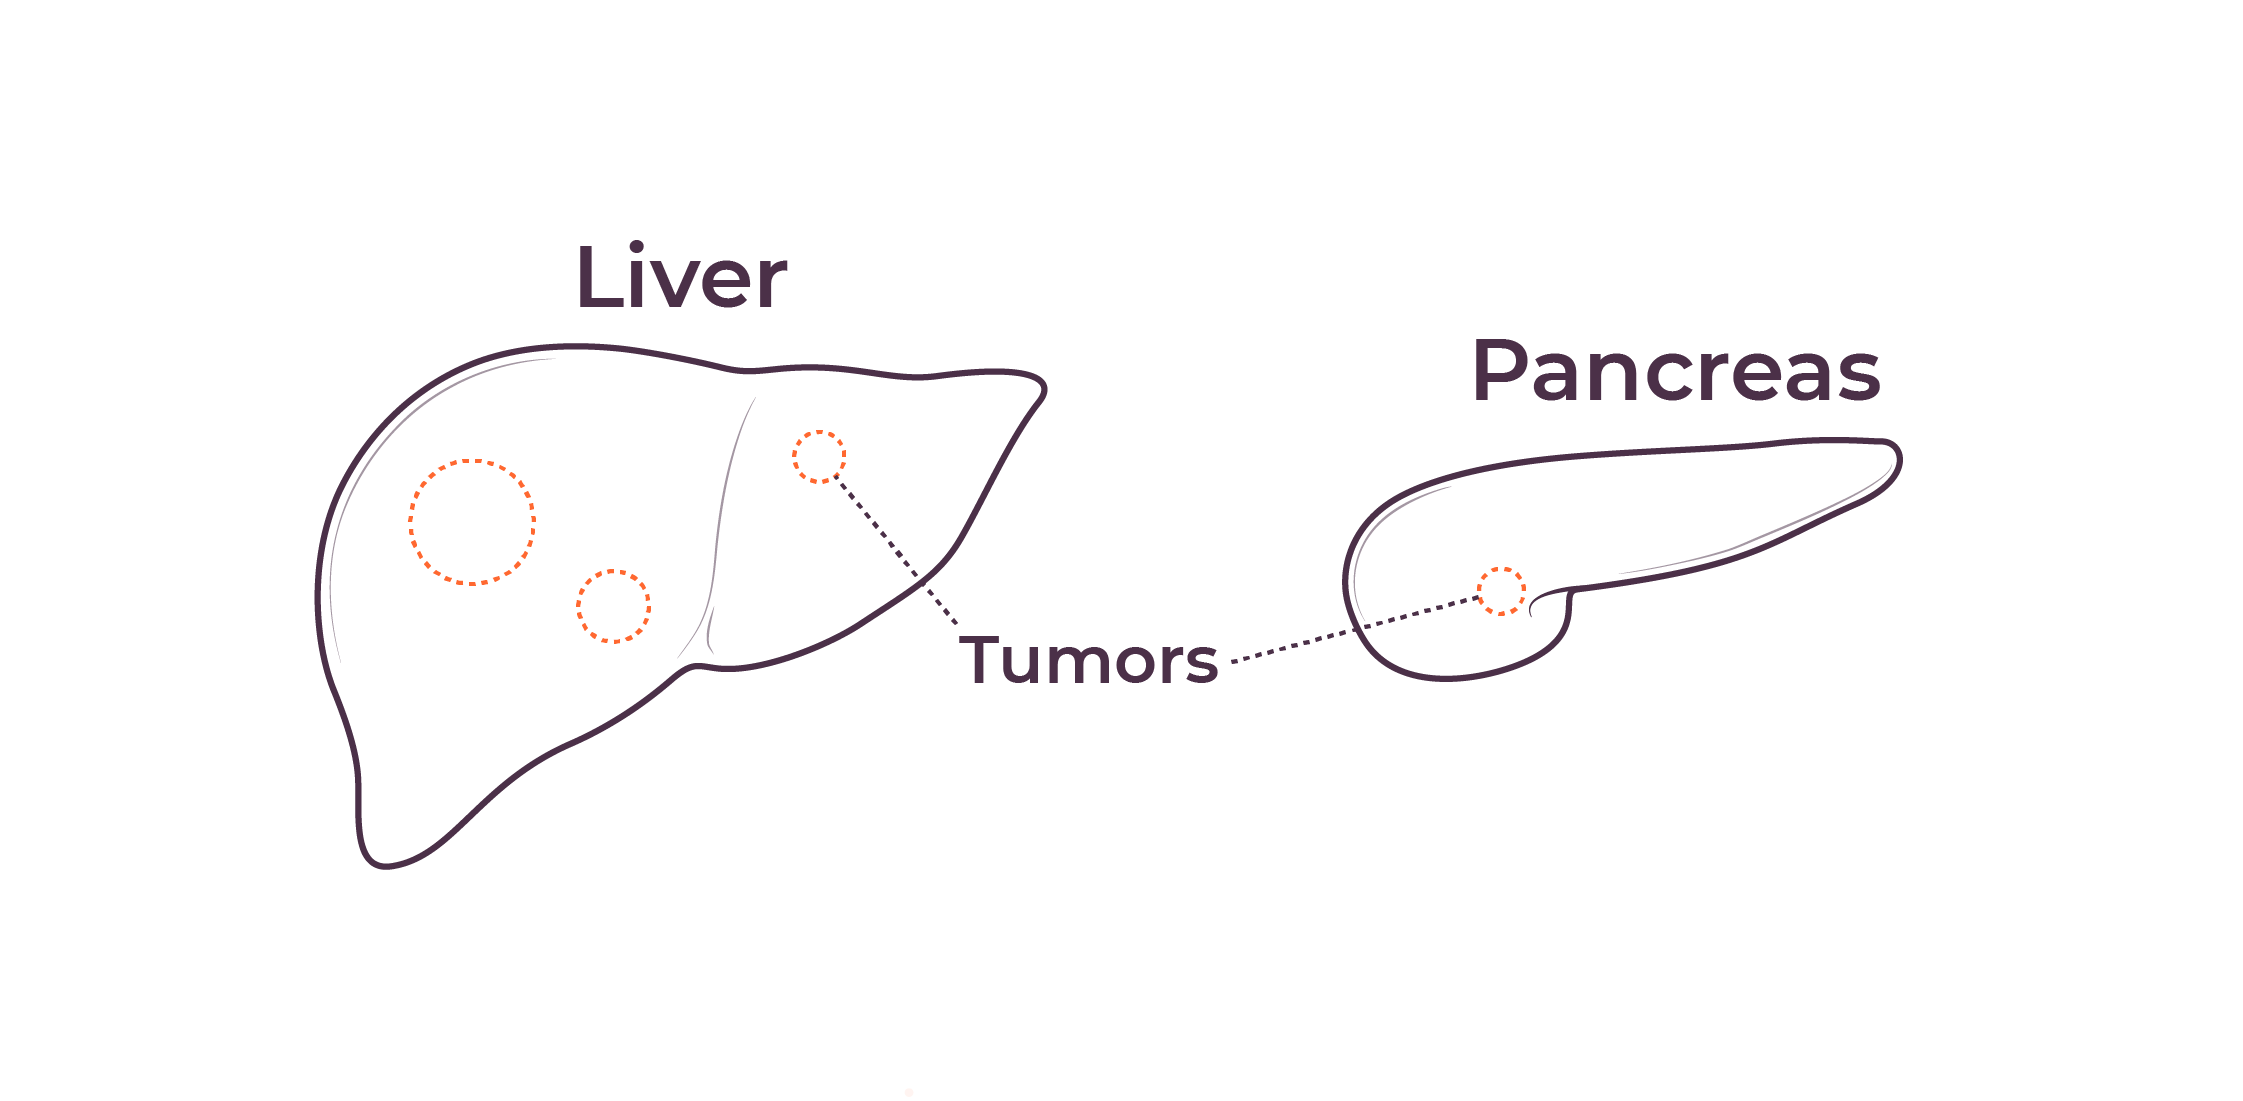 Illustration of the liver and the pancreas, two organs in which a dysfunctional immune system plays a role in tumor progression.